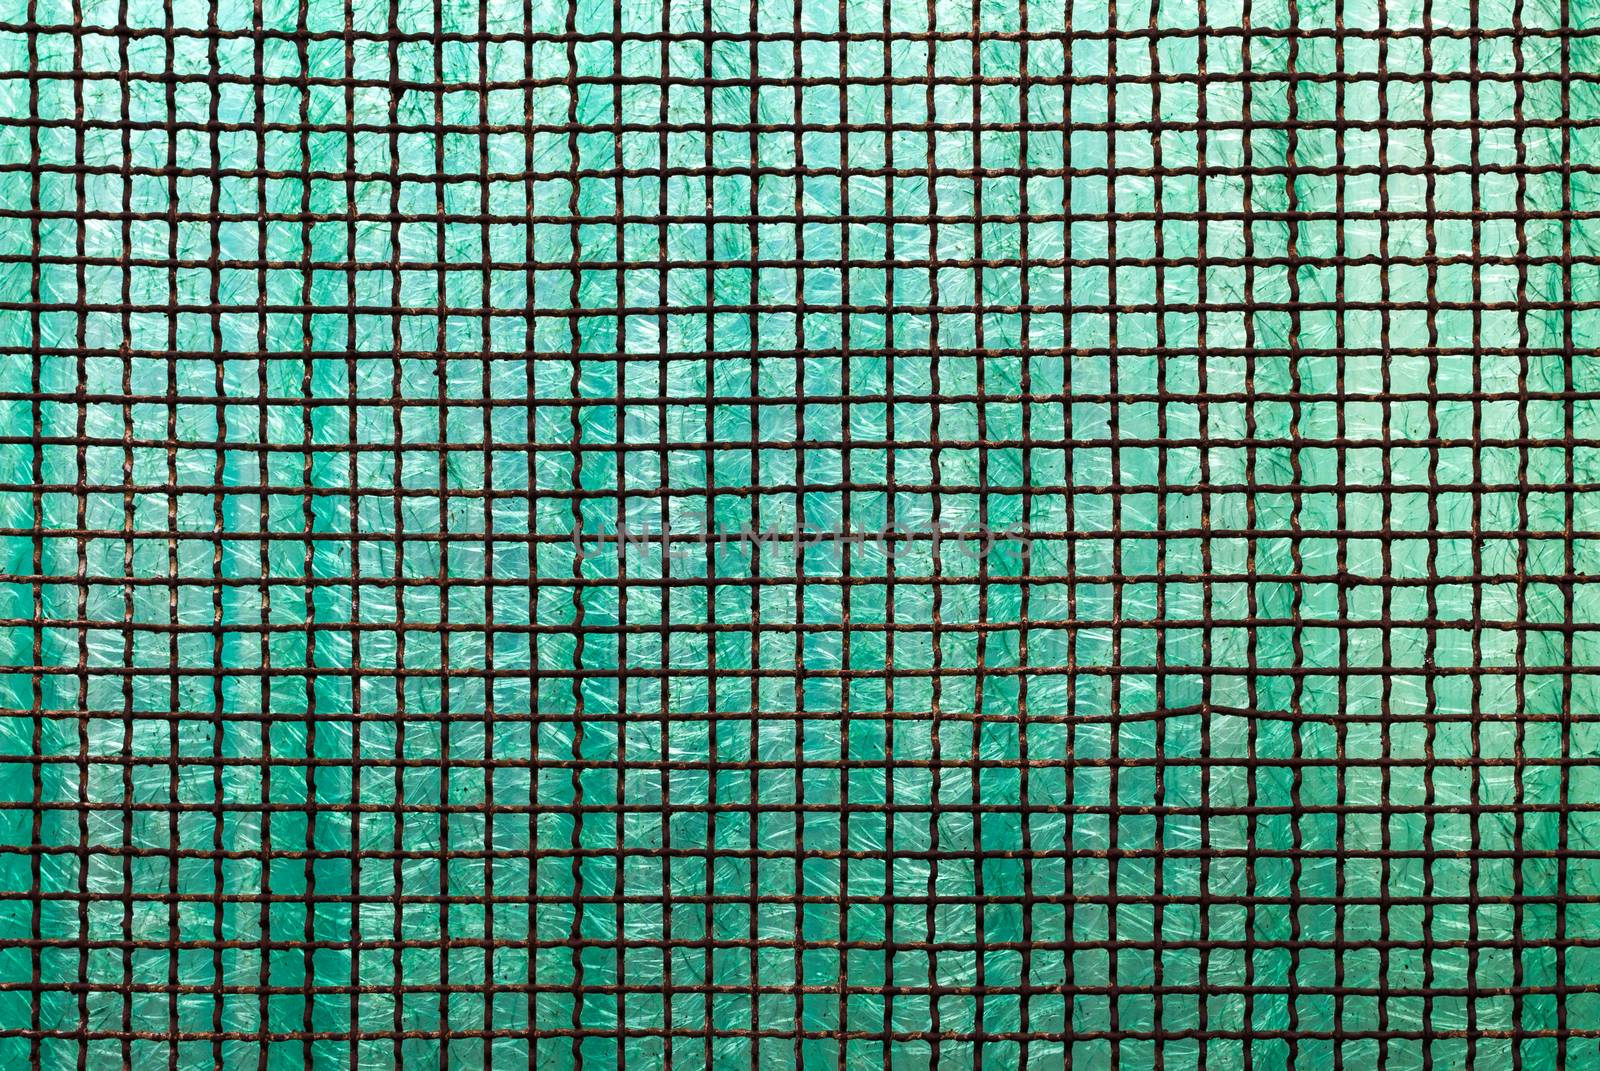 Frosted green glass, reinforced with an iron grid now rusty.